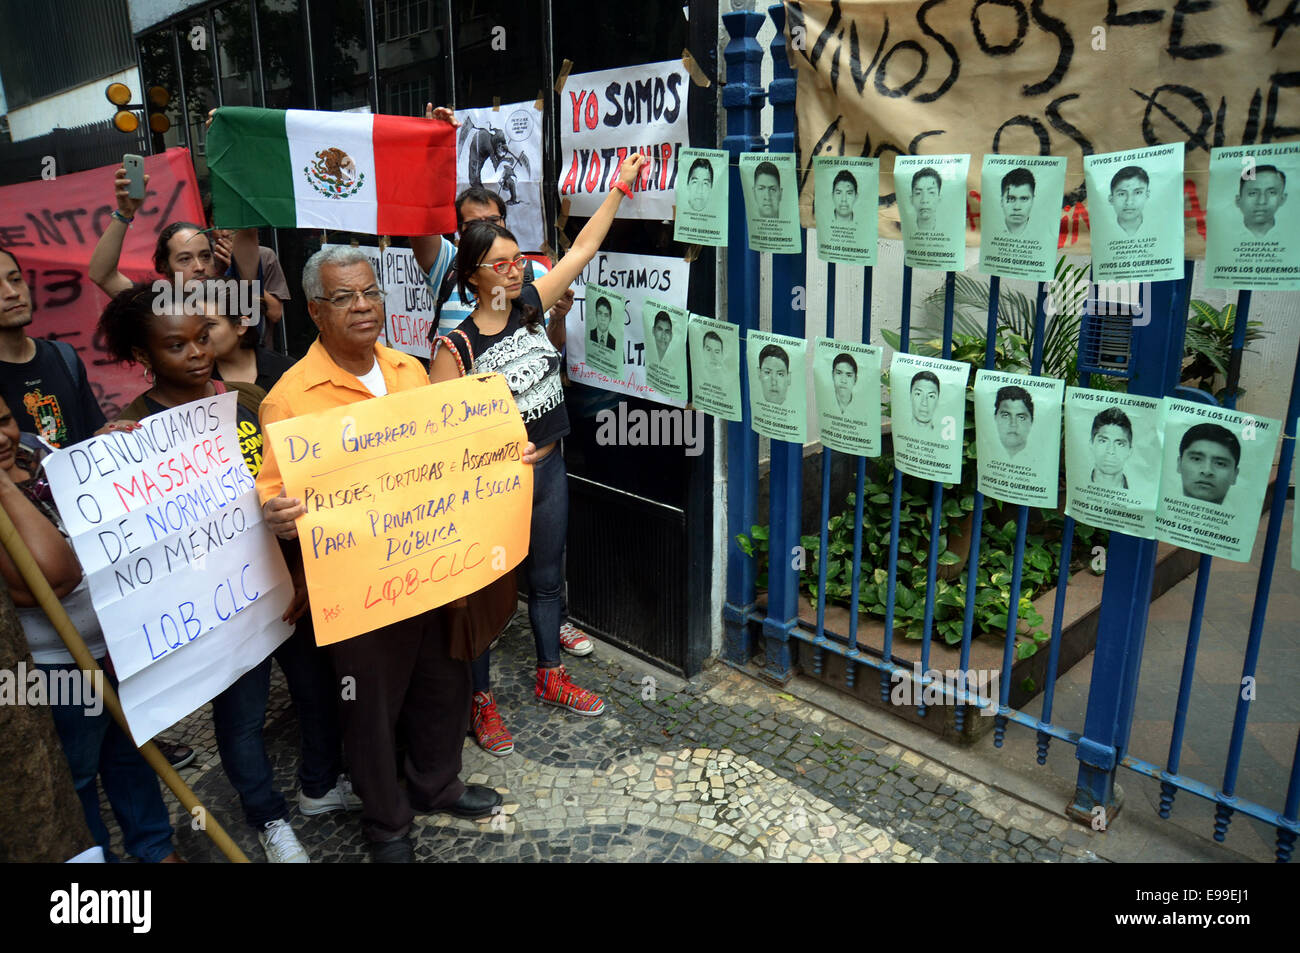 Rio De Janeiro, Brazil. 22nd Oct, 2014. People take part in a protest in front of the General Consulate of Mexico in protest for the disappearance of 43 students from the Ayotzinapa teachers' training college, in Rio de Janeiro, Brazil, on Oct. 22, 2014. Renowned intellectuals from around the world have joined an international outcry, demanding justice in the case of 43 students missing since late September in Mexico, local media reported Wednesday. © Adriano Ishibashi/Frame/AGENCIA ESTADO/Xinhua/Alamy Live News Stock Photo